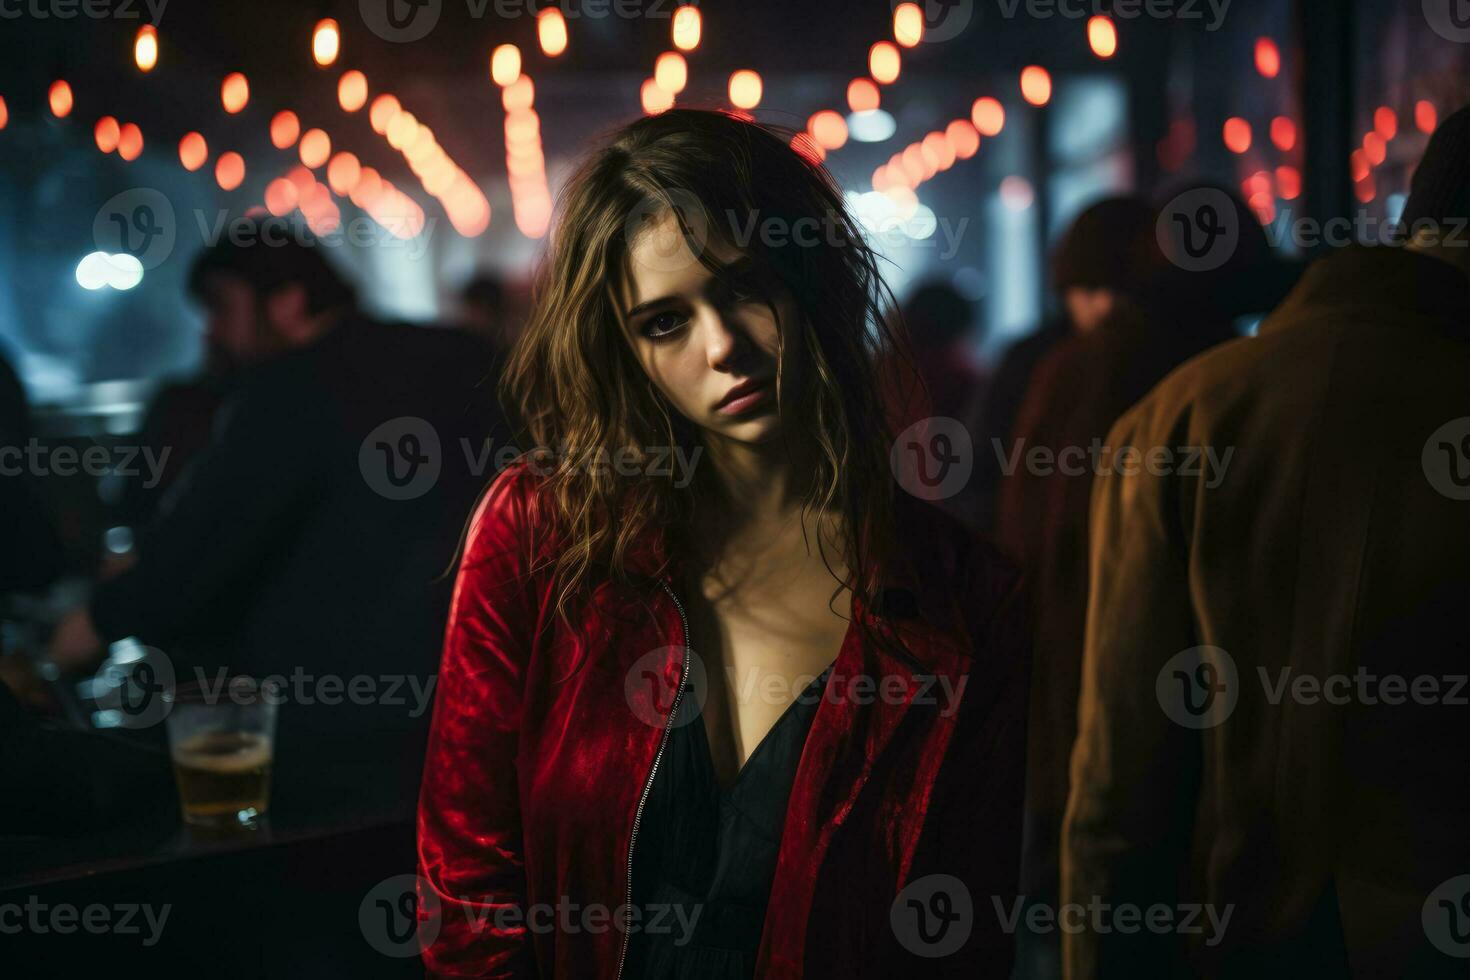 Sad individual lost in thought experiencing melancholy in crowded nightclub photo